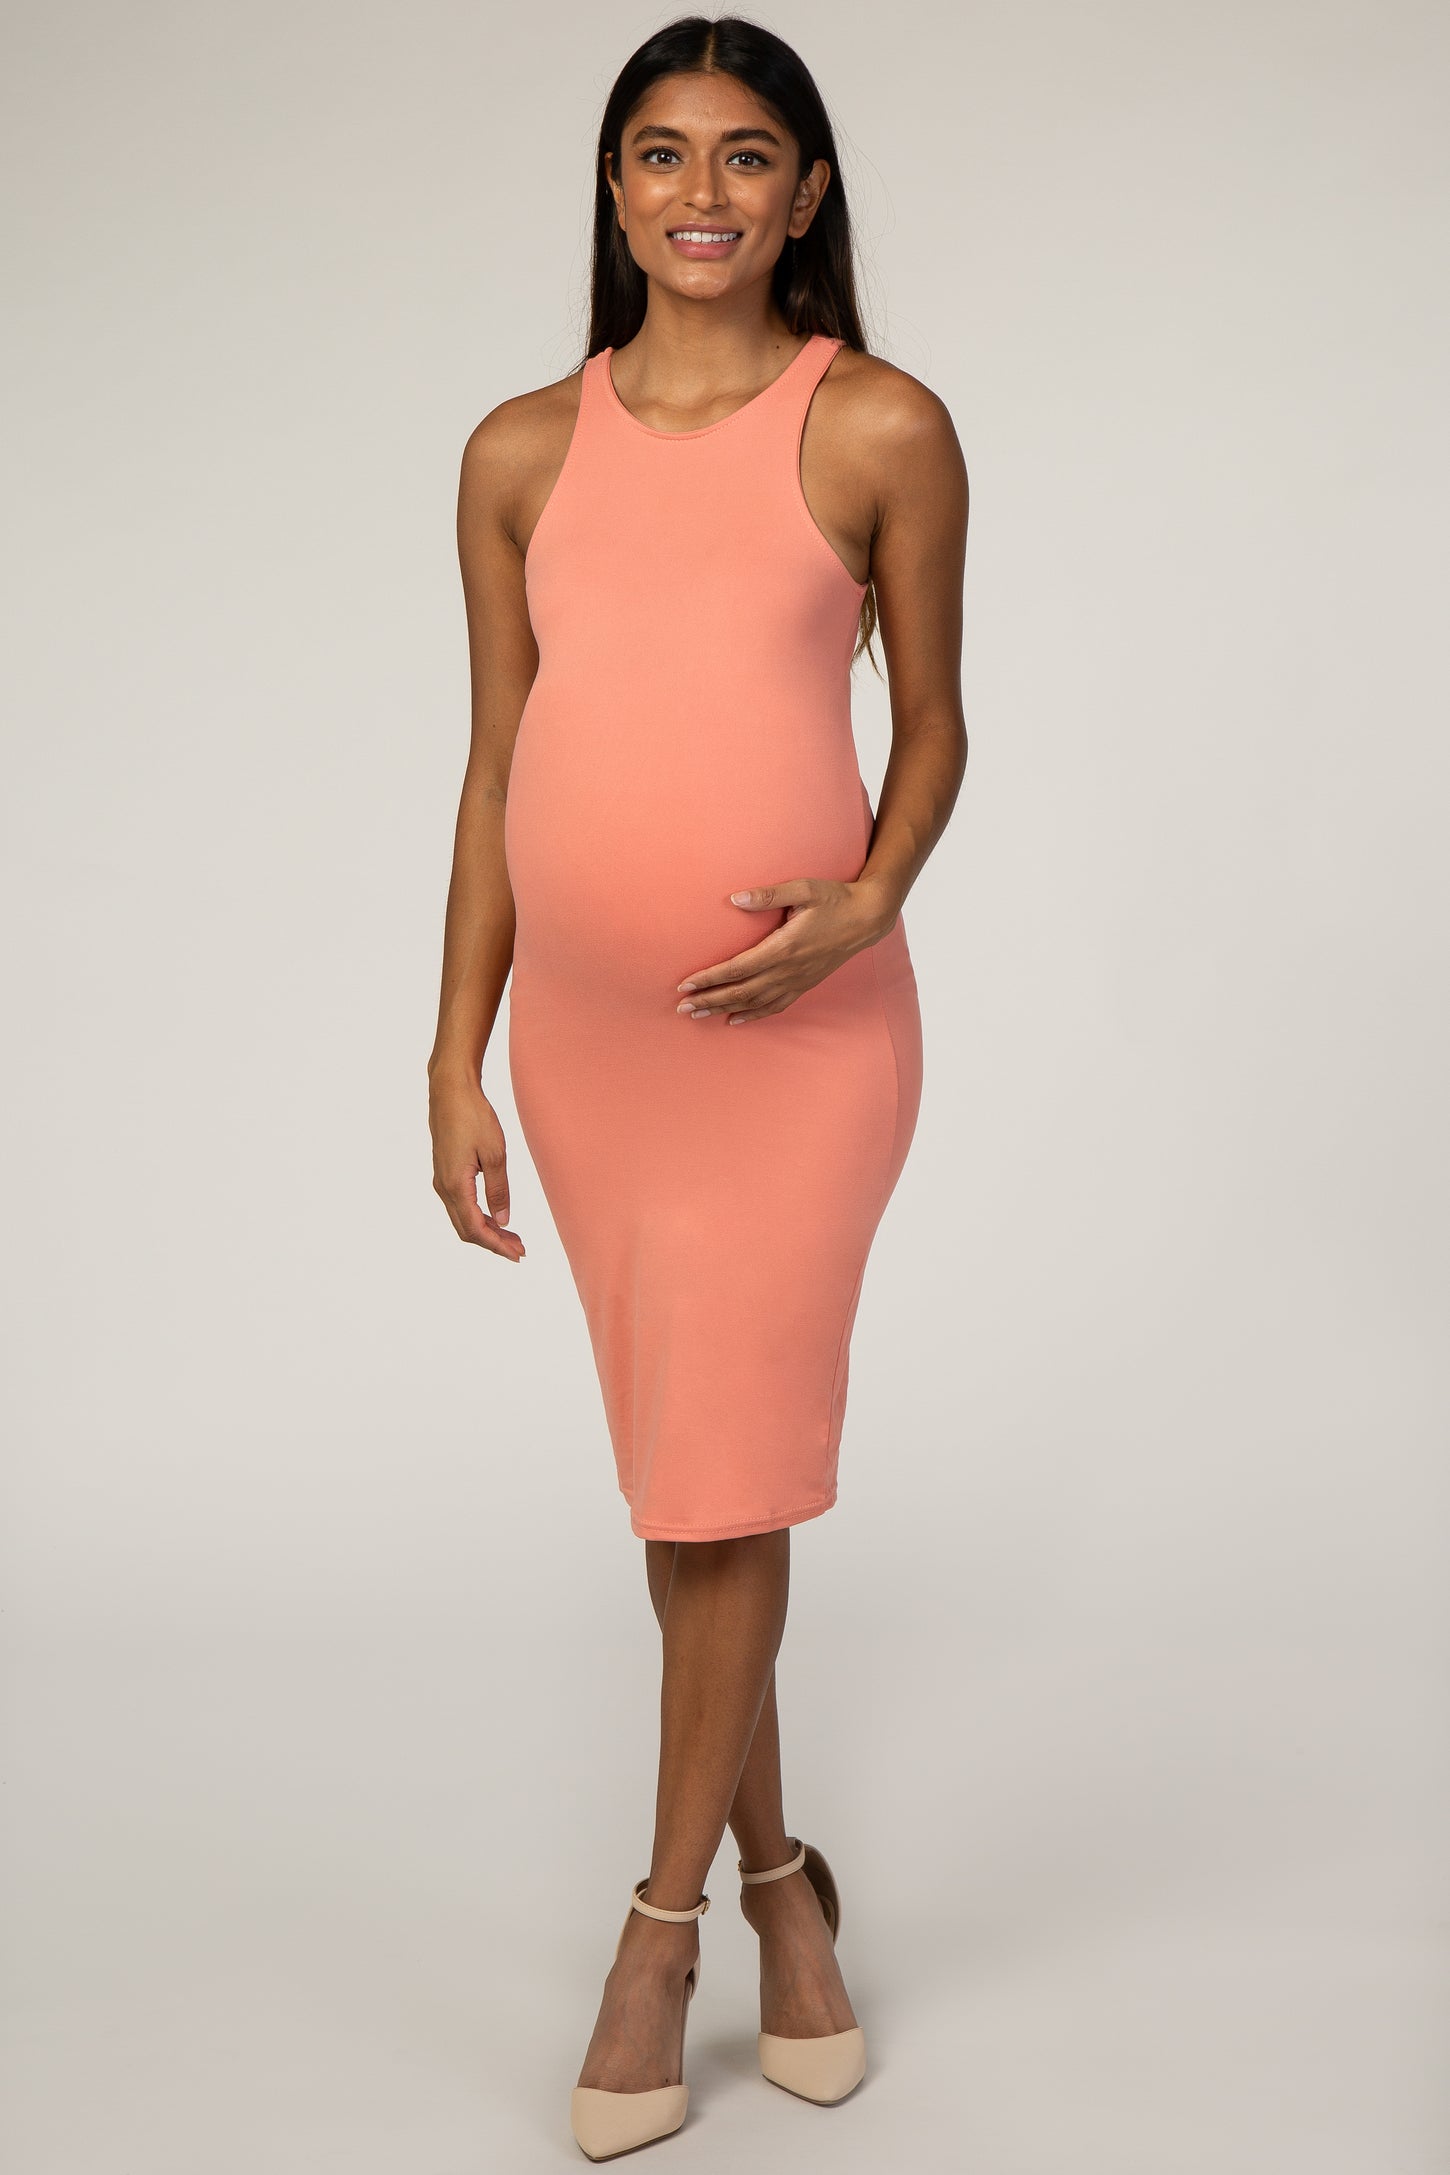 Coral Super Soft Fitted Maternity Dress